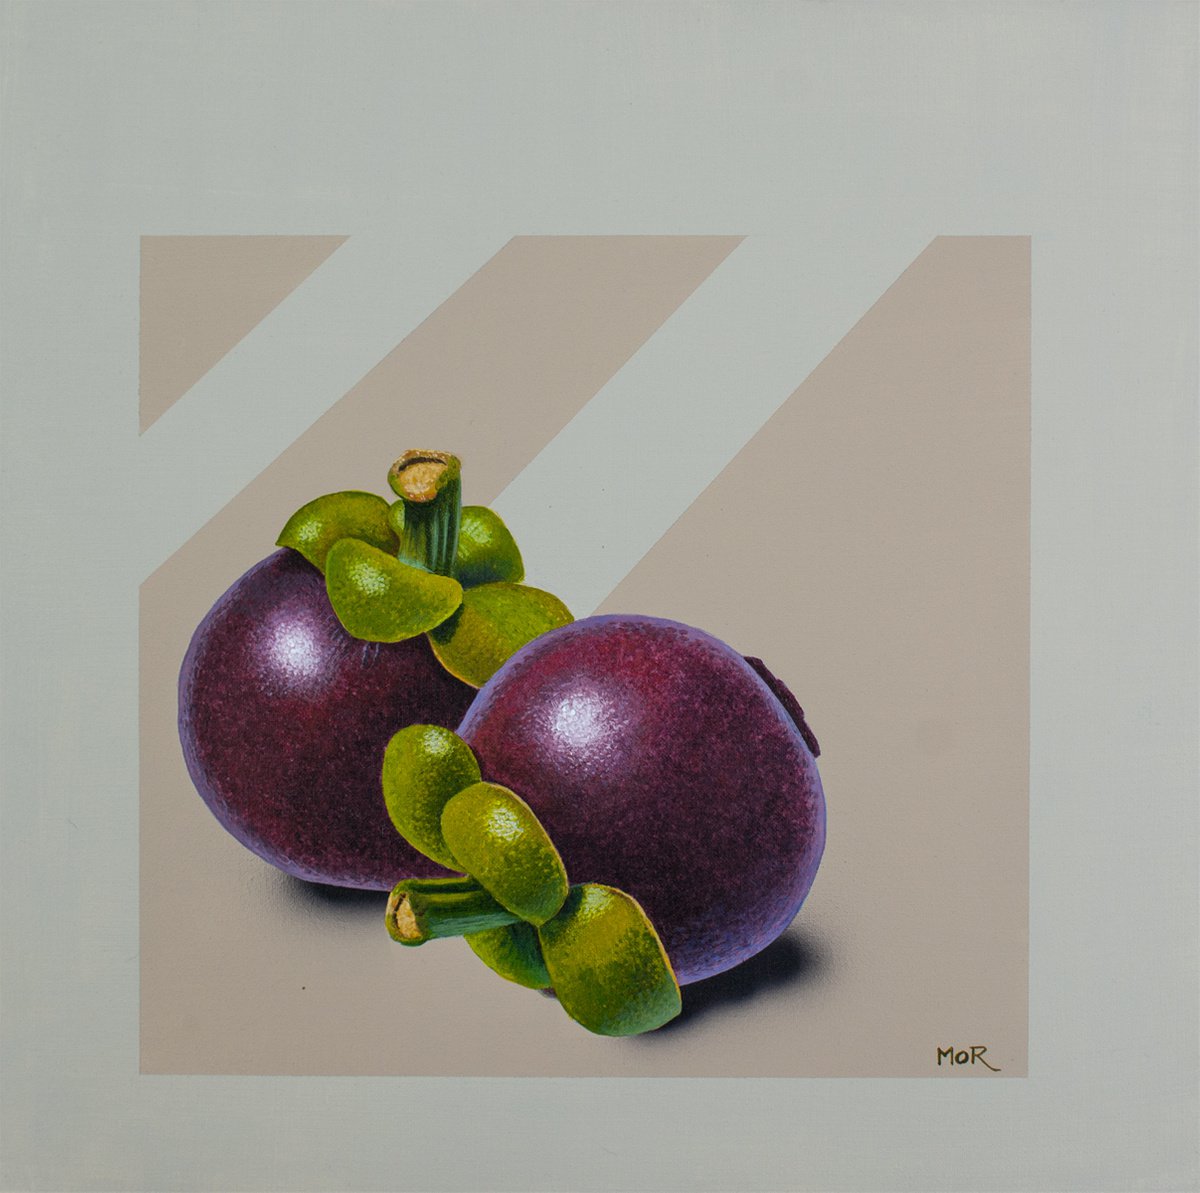 Two Mangosteens by Dietrich Moravec